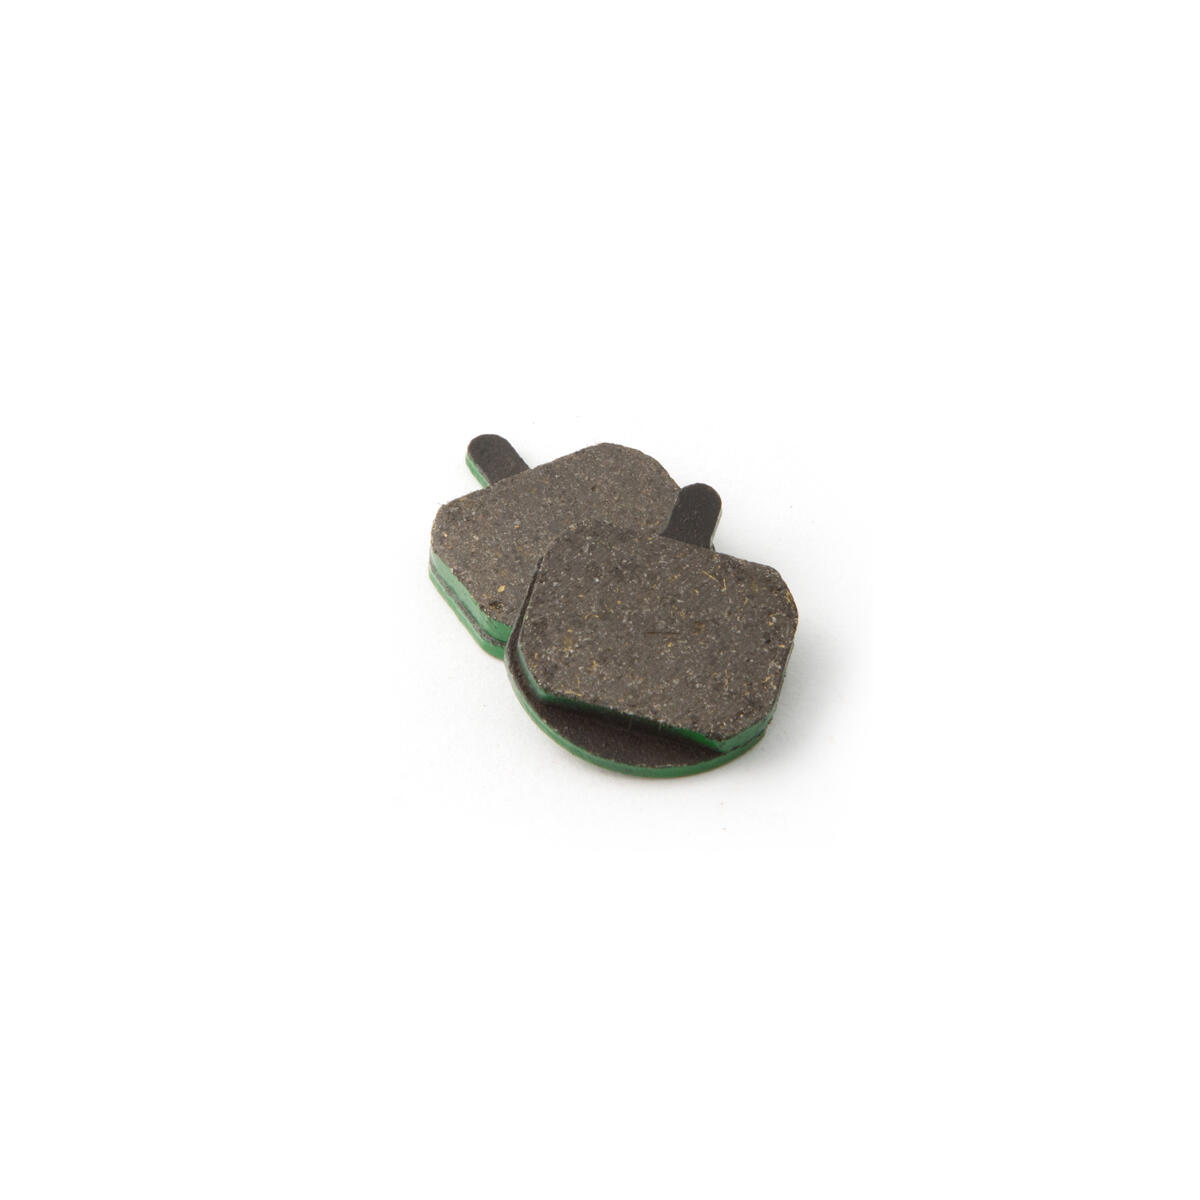 CLARKS CYCLE SYTEMS Organic Disc Brake Pads for Hayes Sole/GX-2/MX (2/3/4)